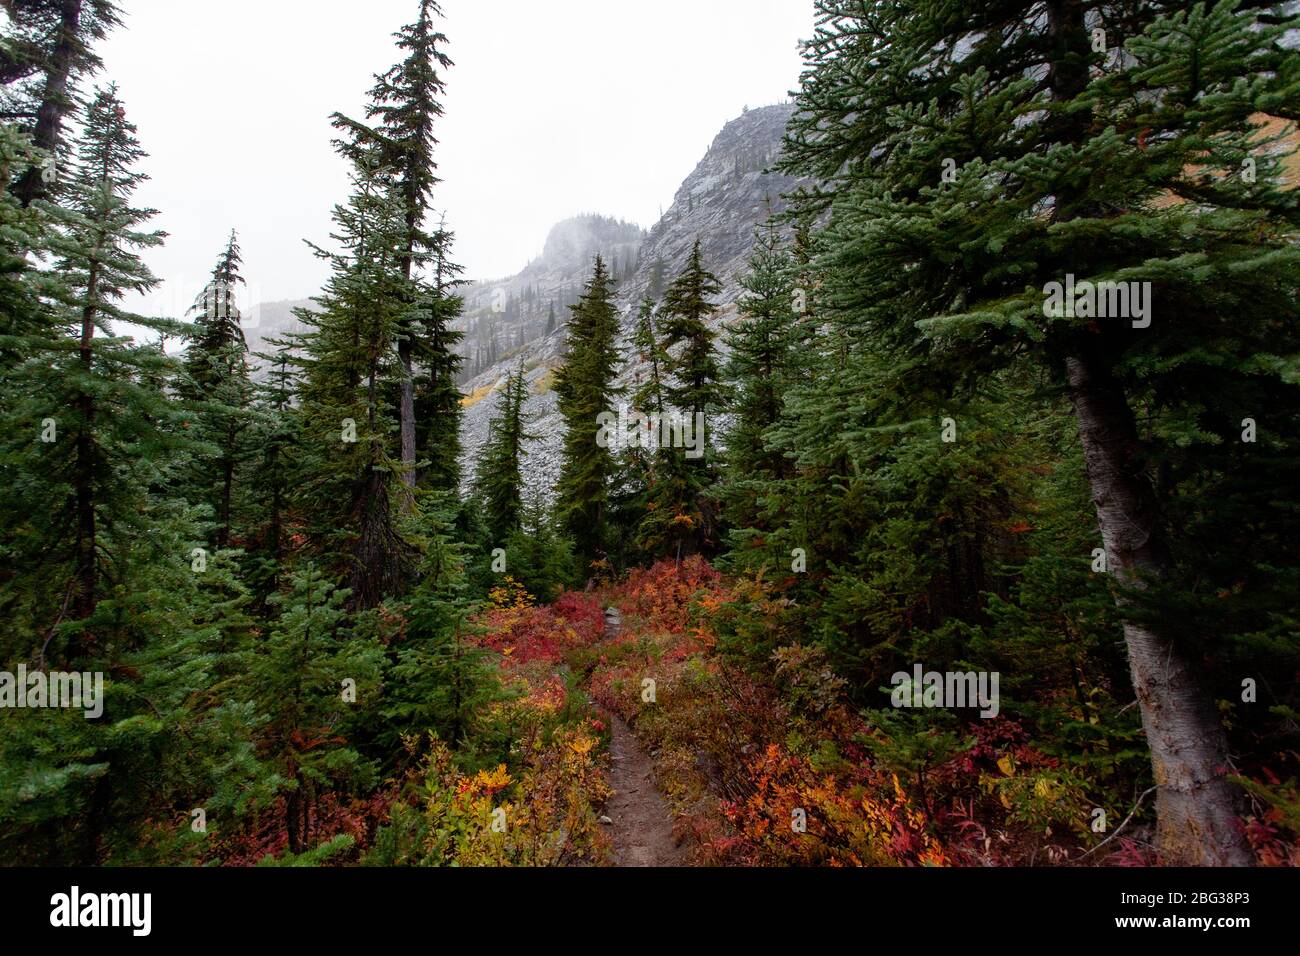 A narrow hiking trail winds through a stand of Subalpine fir trees and Western larch trees on a foggy day, with mountain peaks in the background Stock Photo